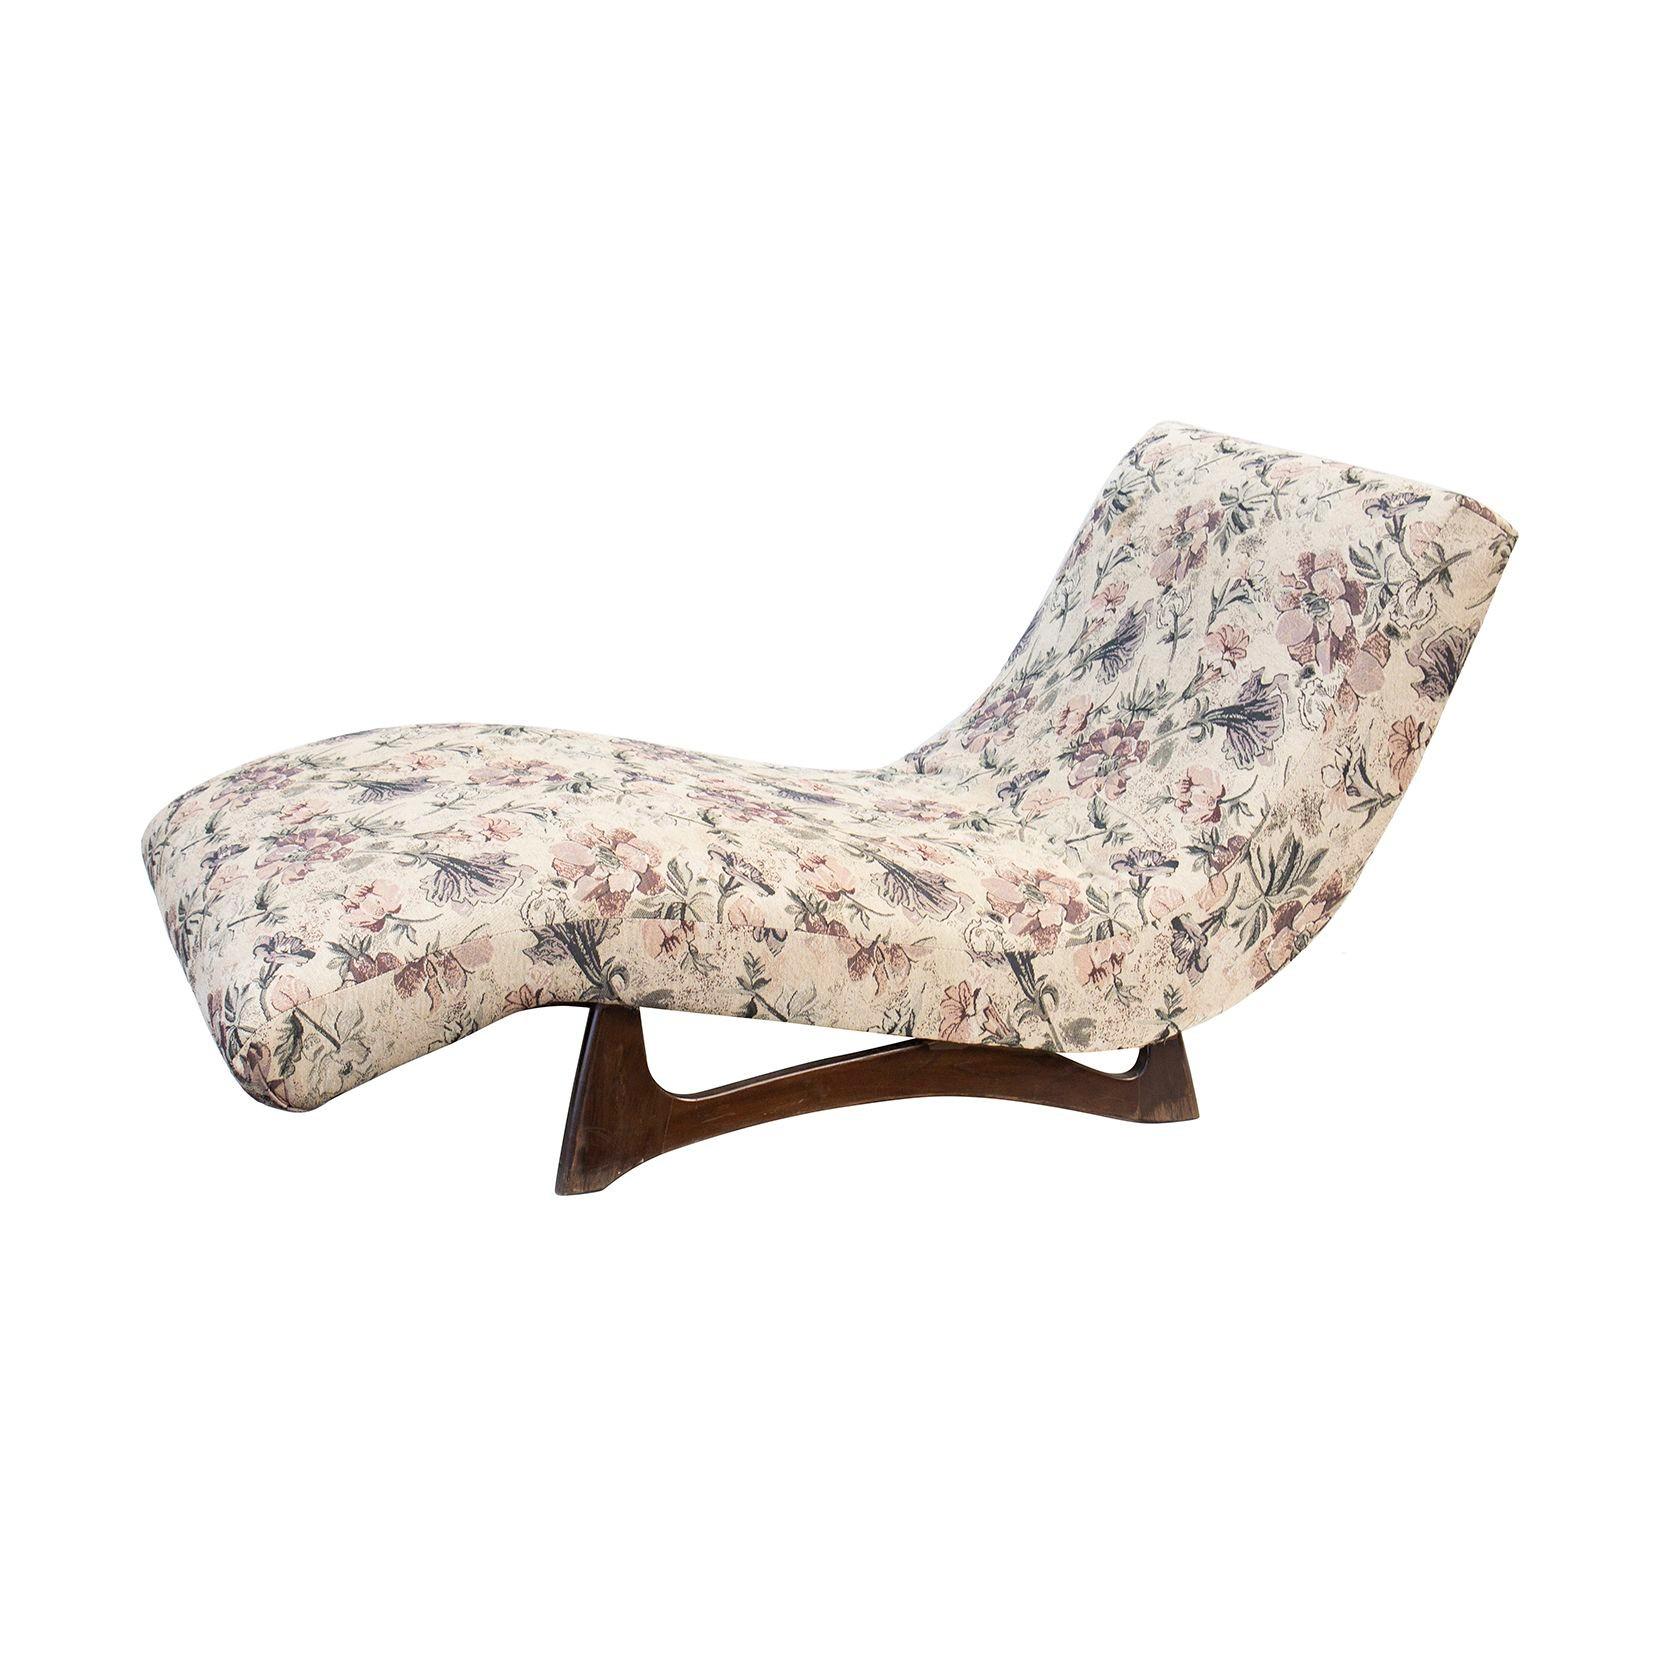 USA, 1960s
Mid-century modern wave chaise lounge designed by Adrian Pearsall for Craft Associates. Reupholstered at one point in the current fabric, no maker's marks remain. This classic piece of mid-century design will quickly become your favorite